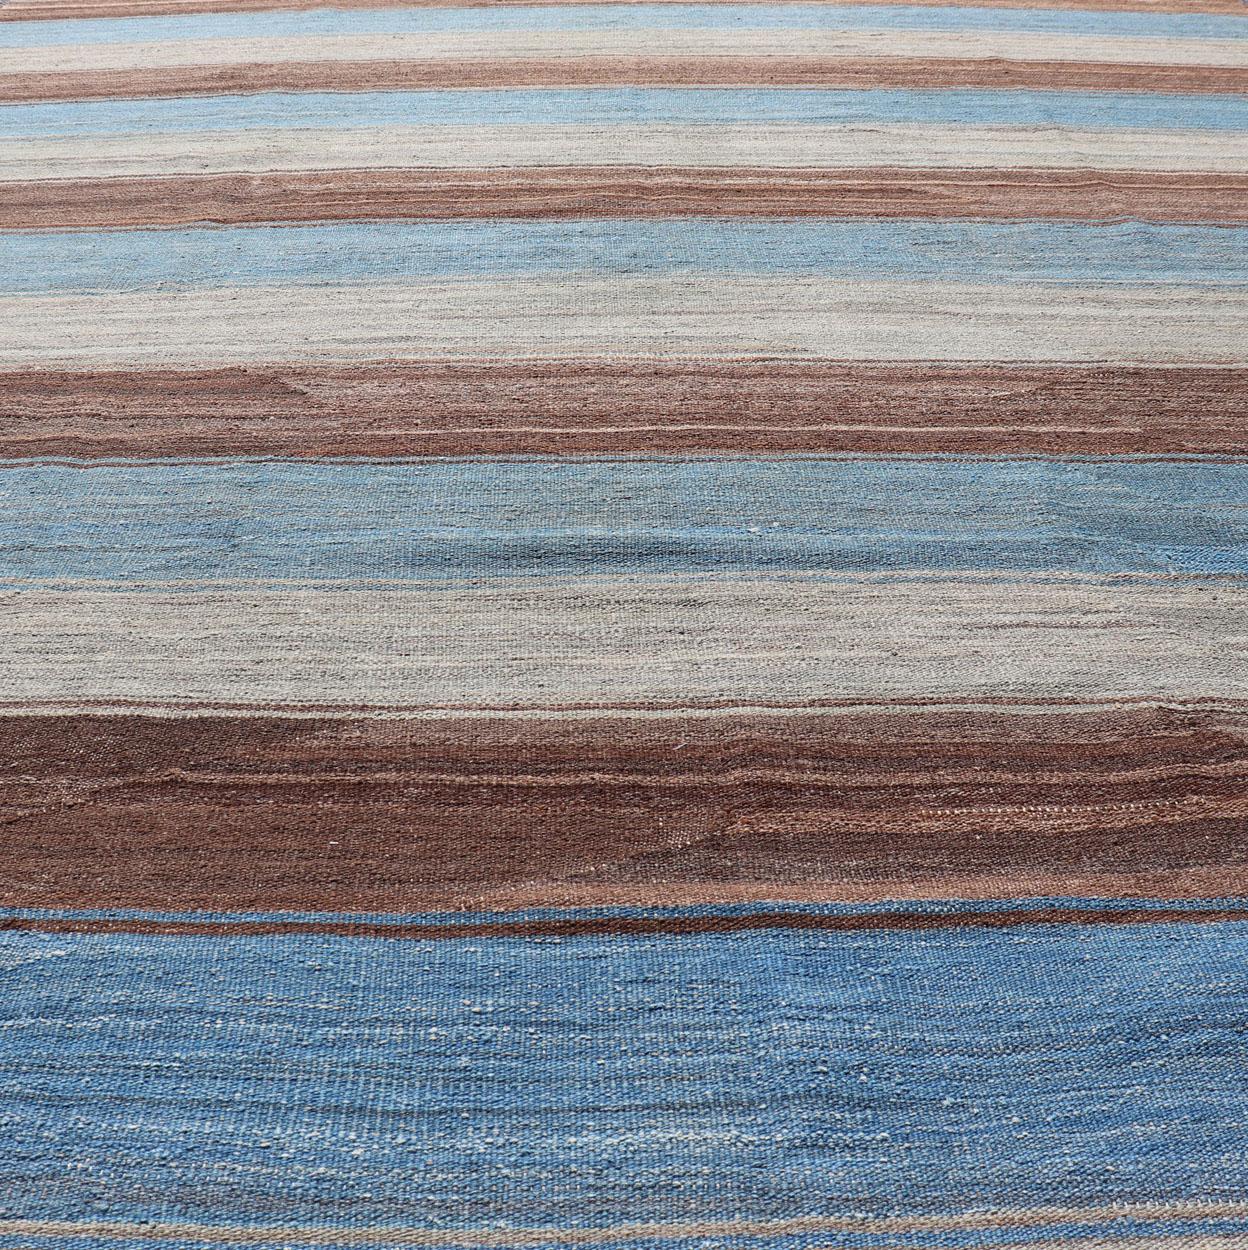 Contemporary Modern Kilim Rug with Stripes in Shades of Blue, Brown, Light Gray and Cream For Sale